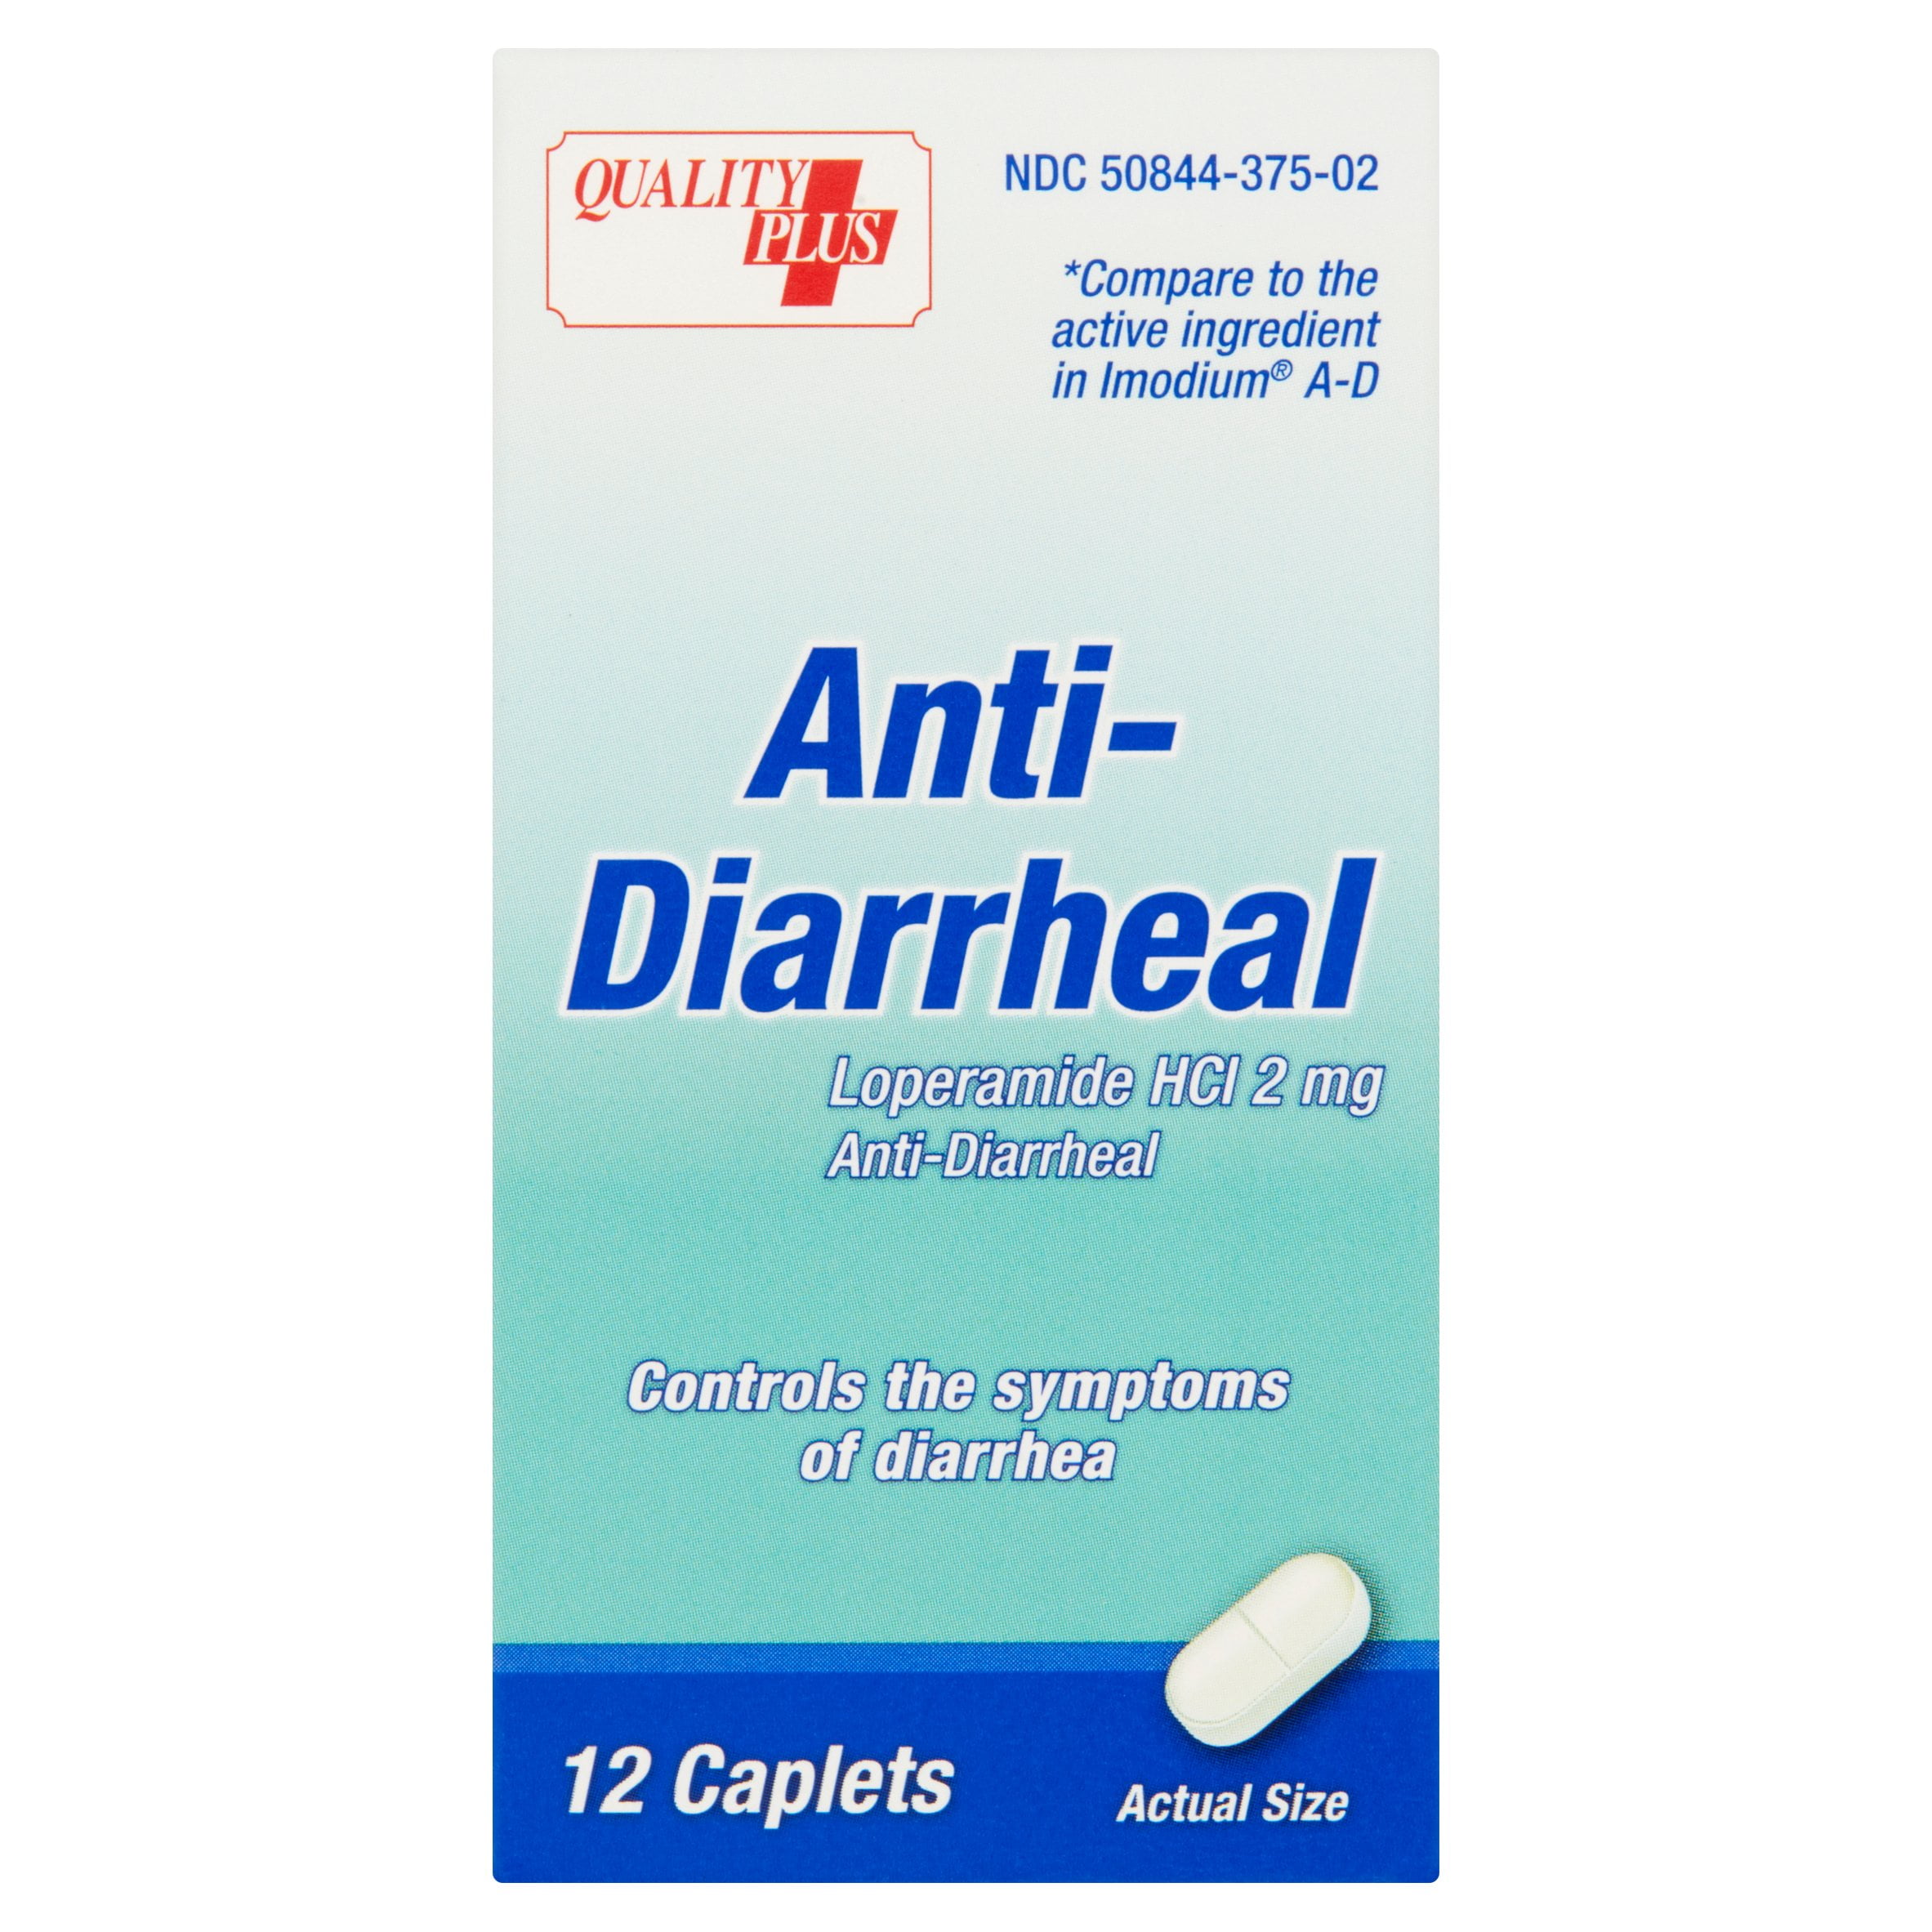 Quality Plus AntiDiarrheal Relief Caplets, Loperamide HCl 2mg, 12